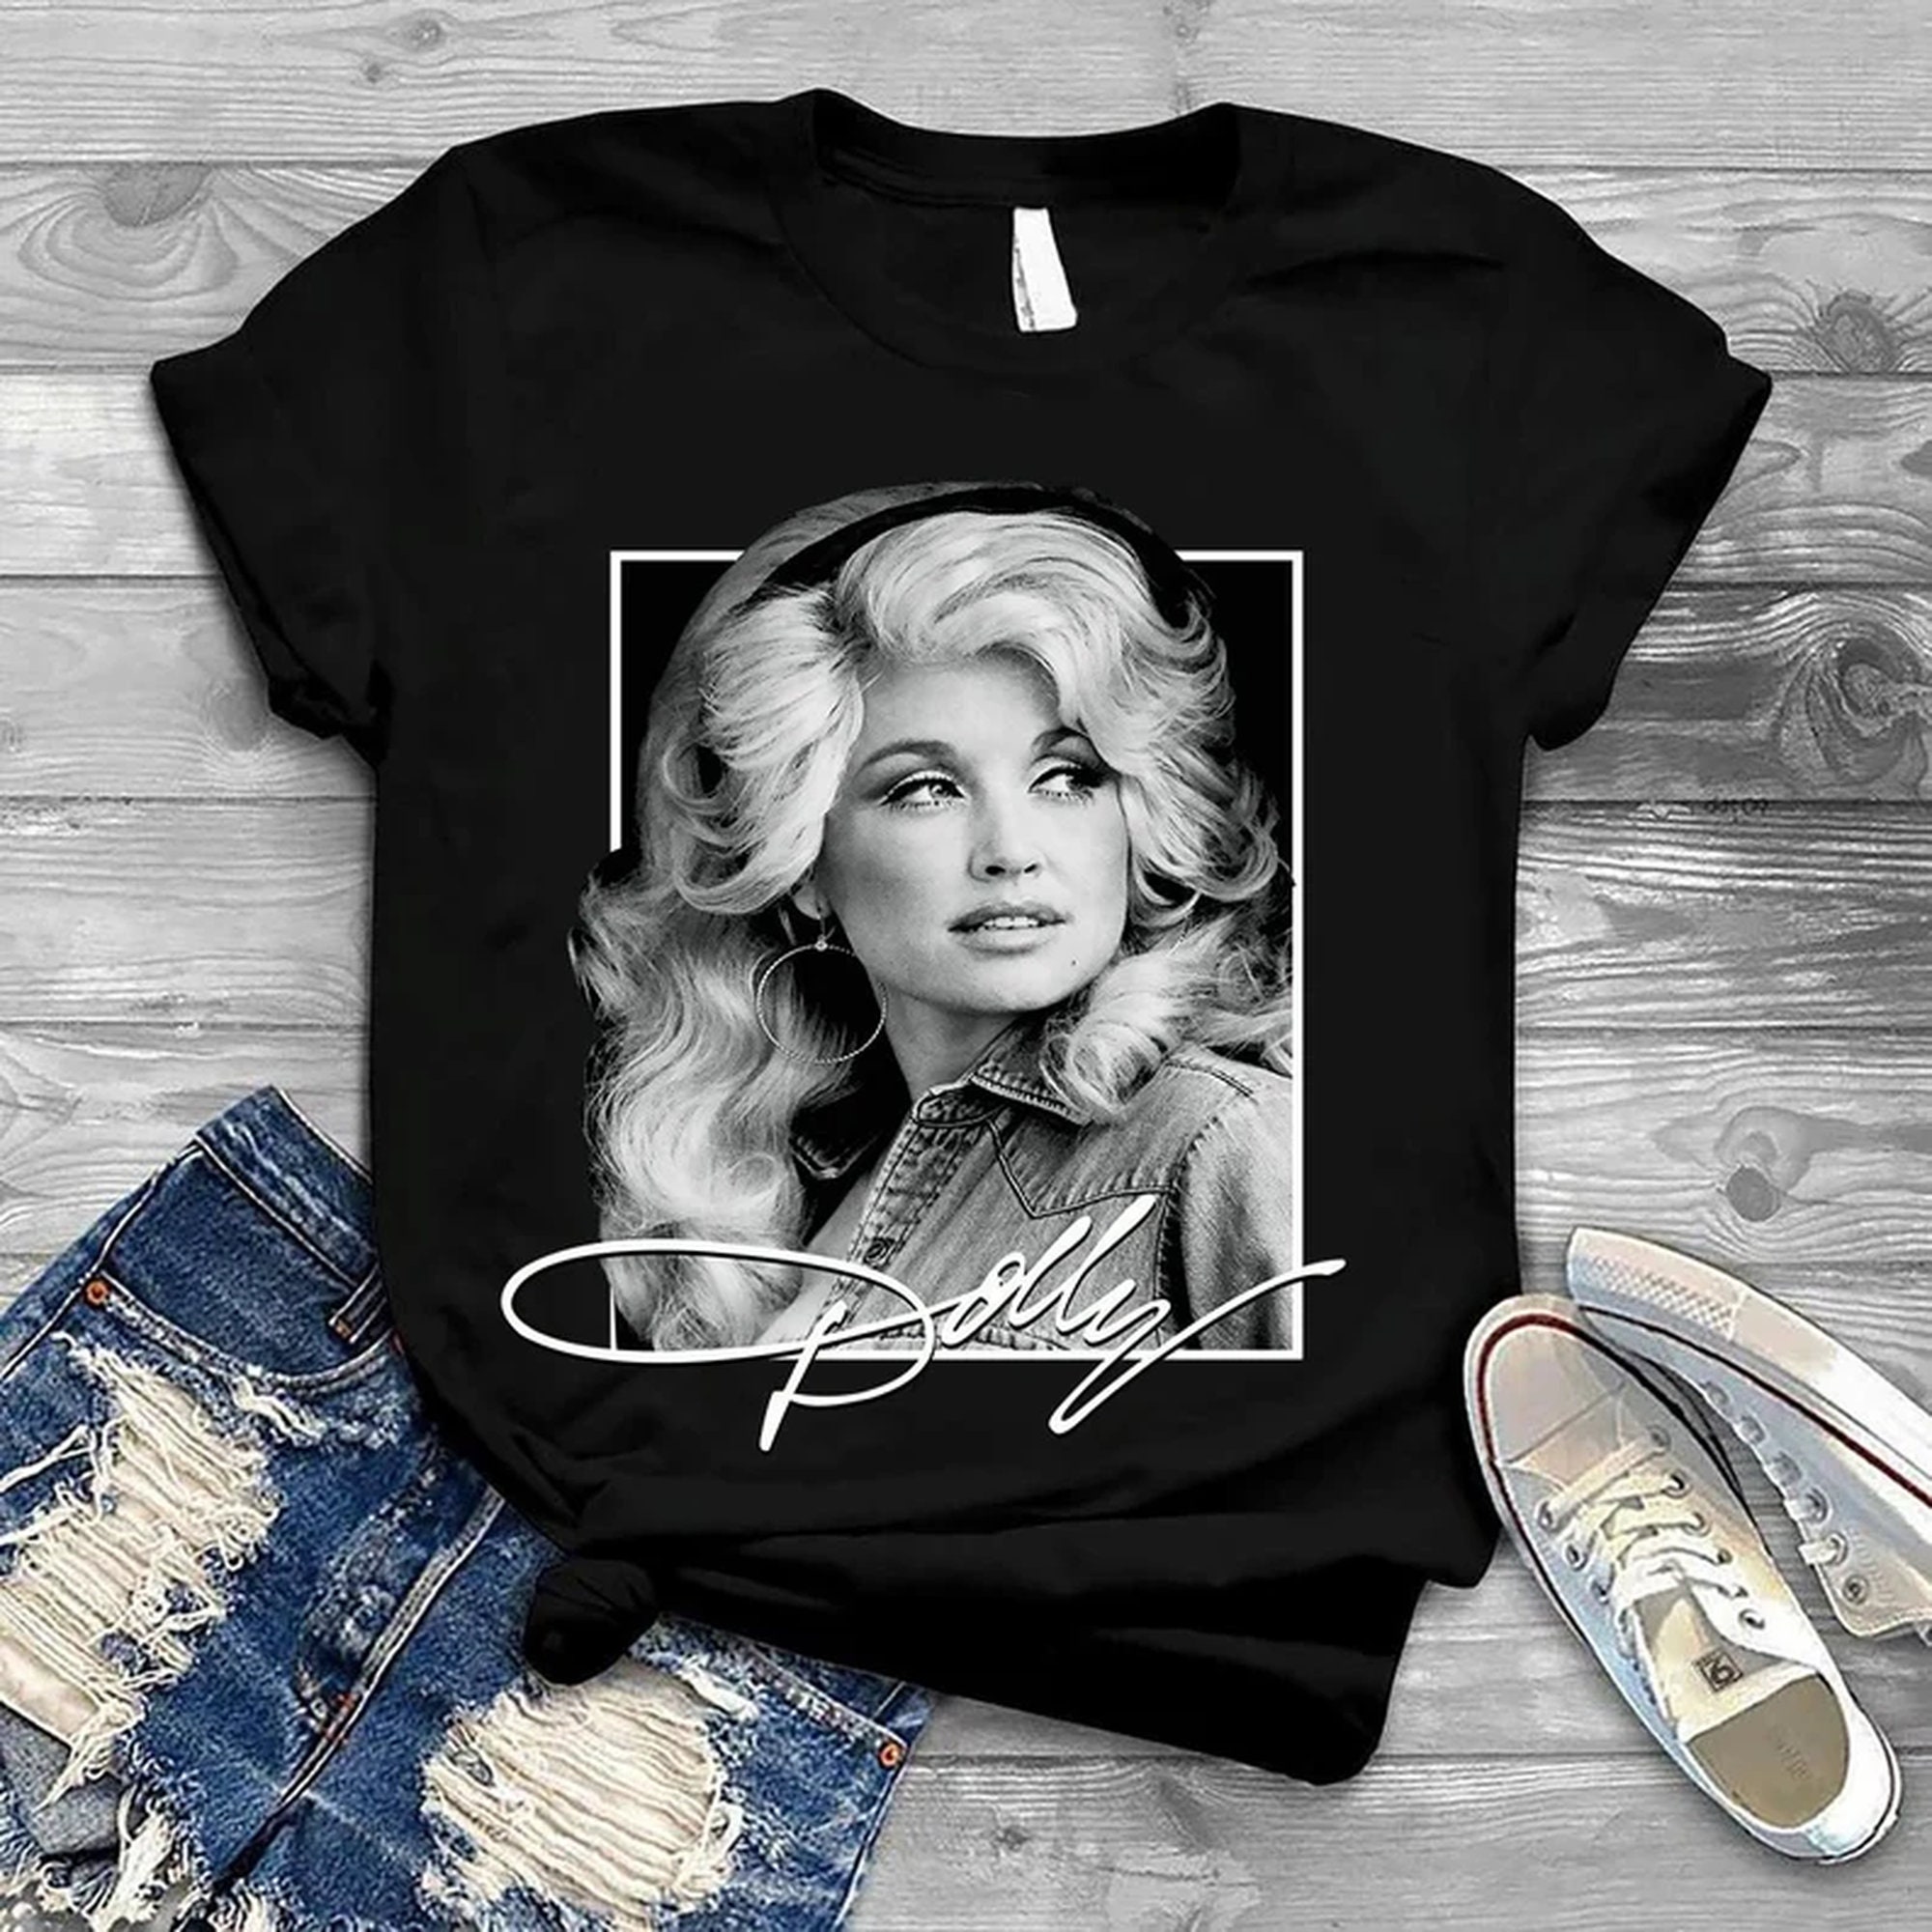 Discover T-shirt Vintage Dolly Parton, Chemise Dolly